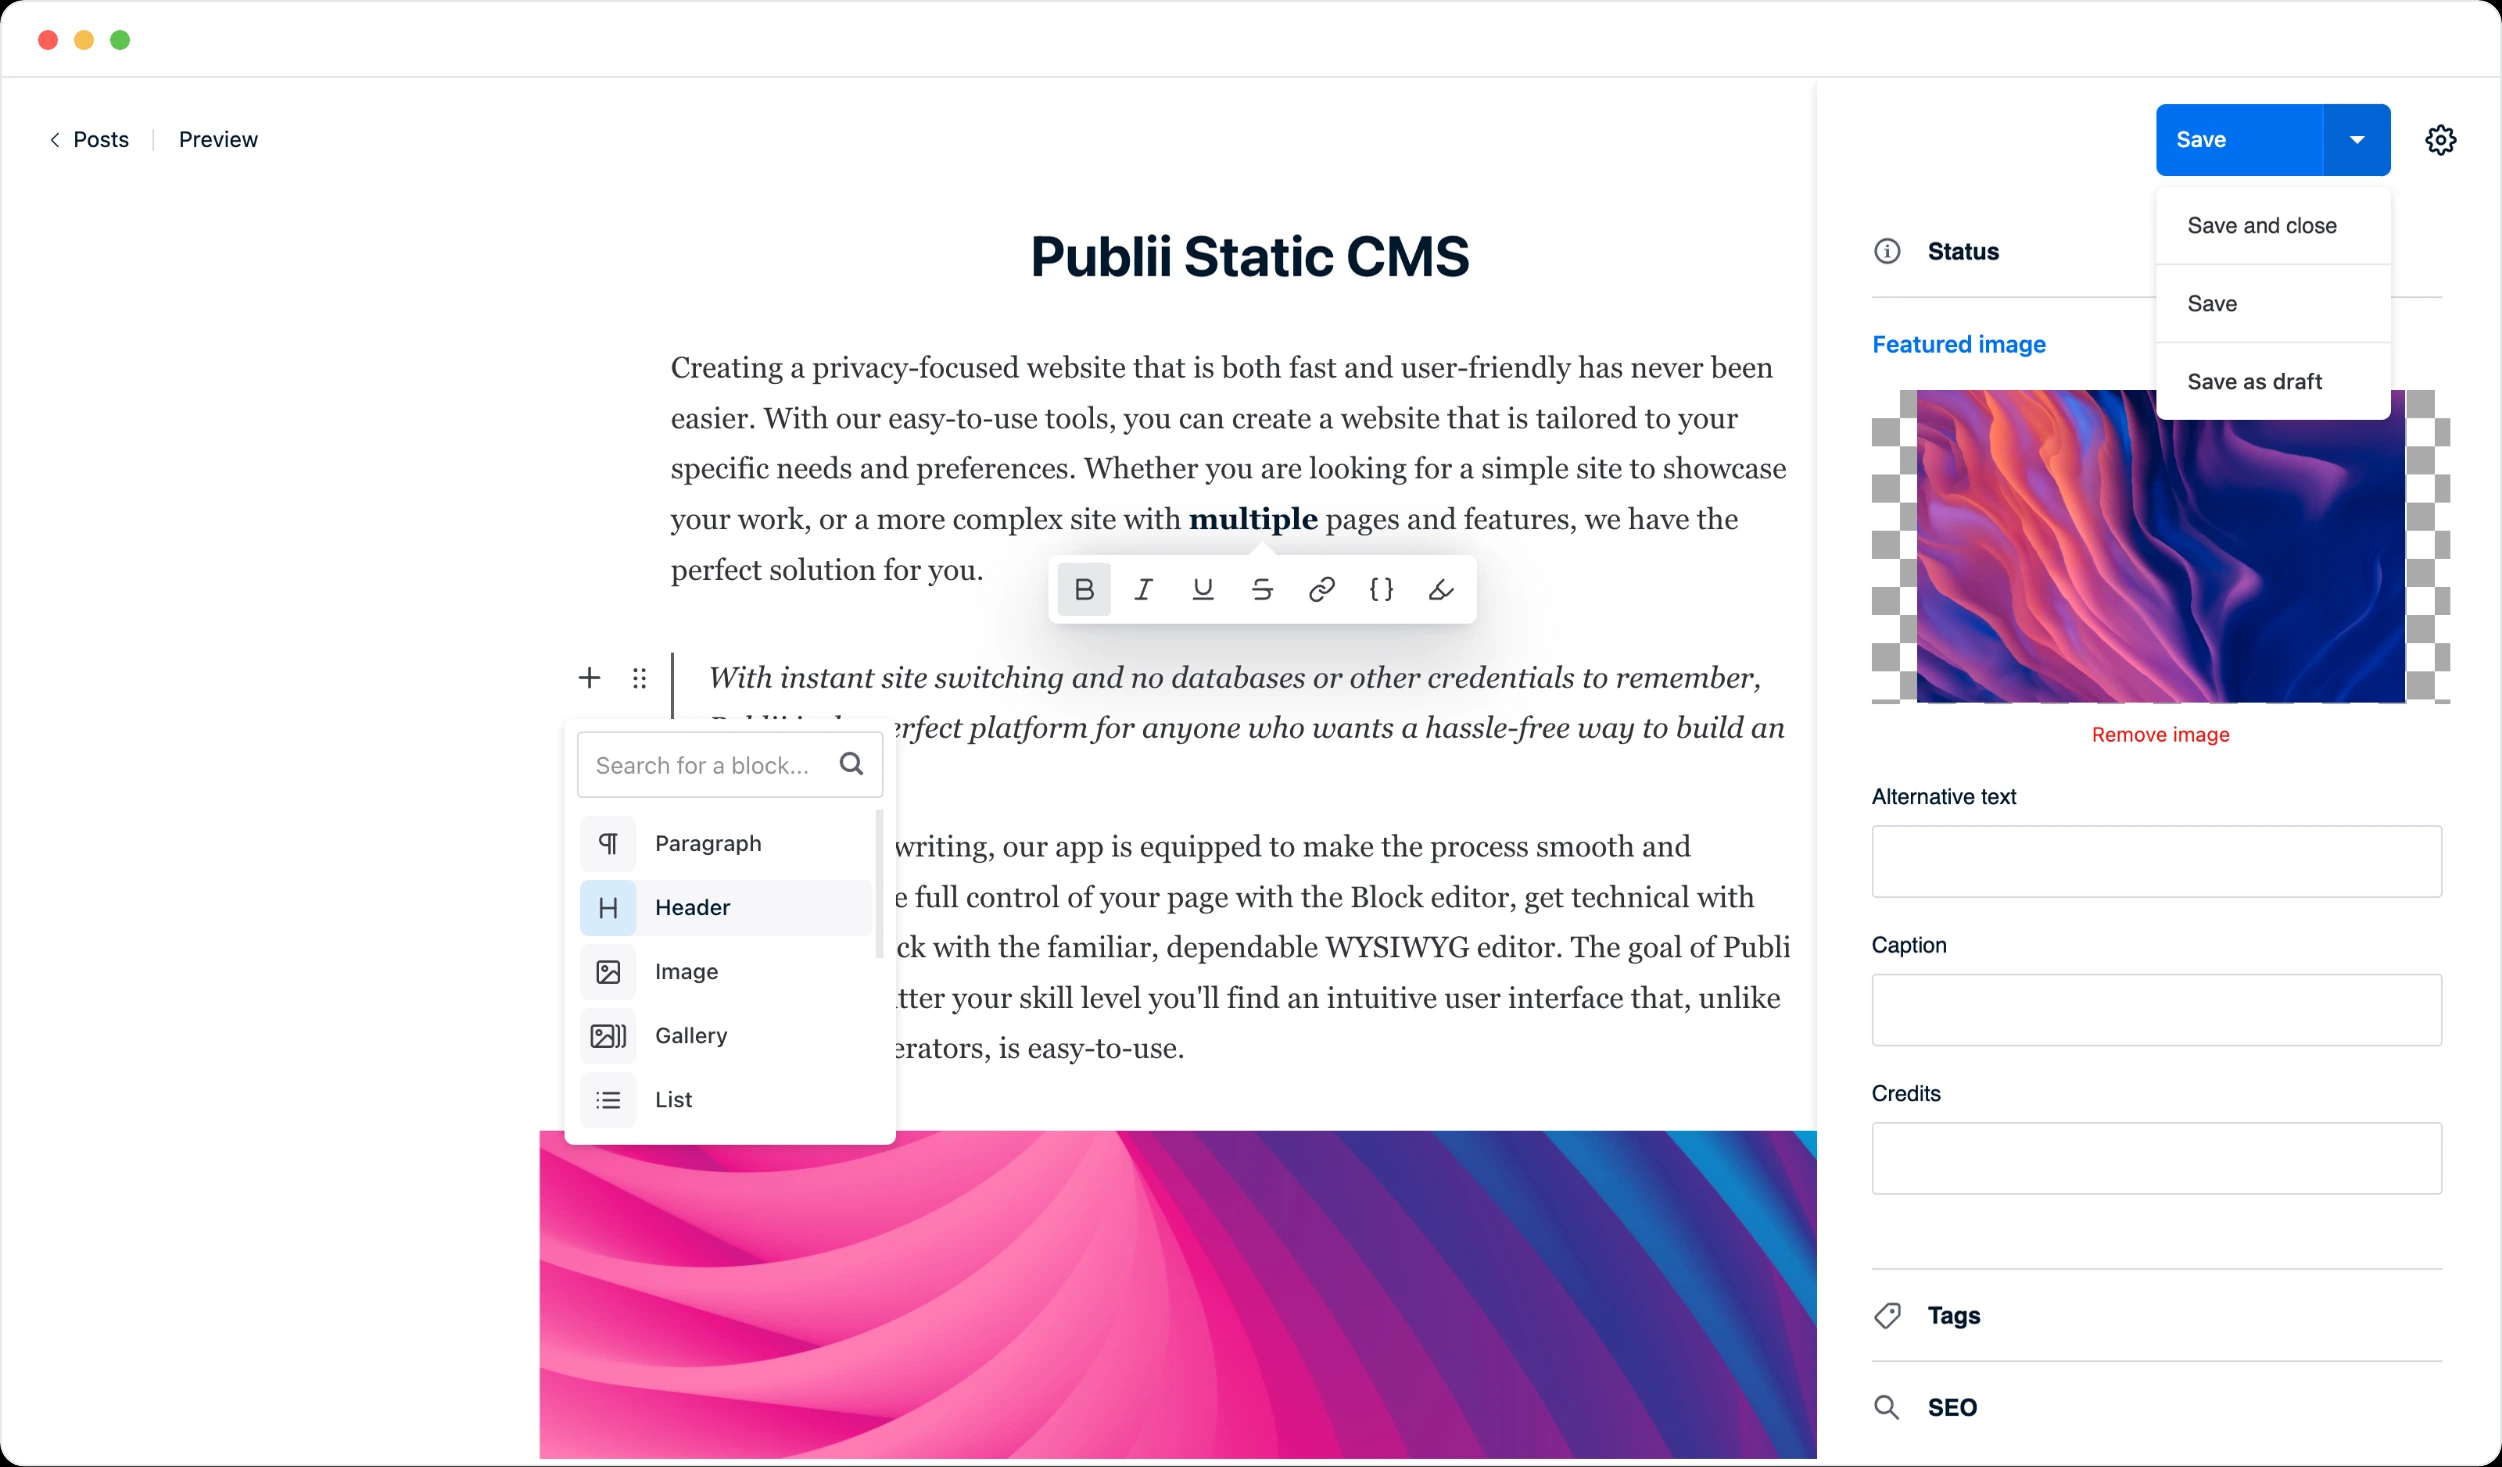 The Static CMS with GUI for Secure, Fast, and GDPR Compliant Websites.